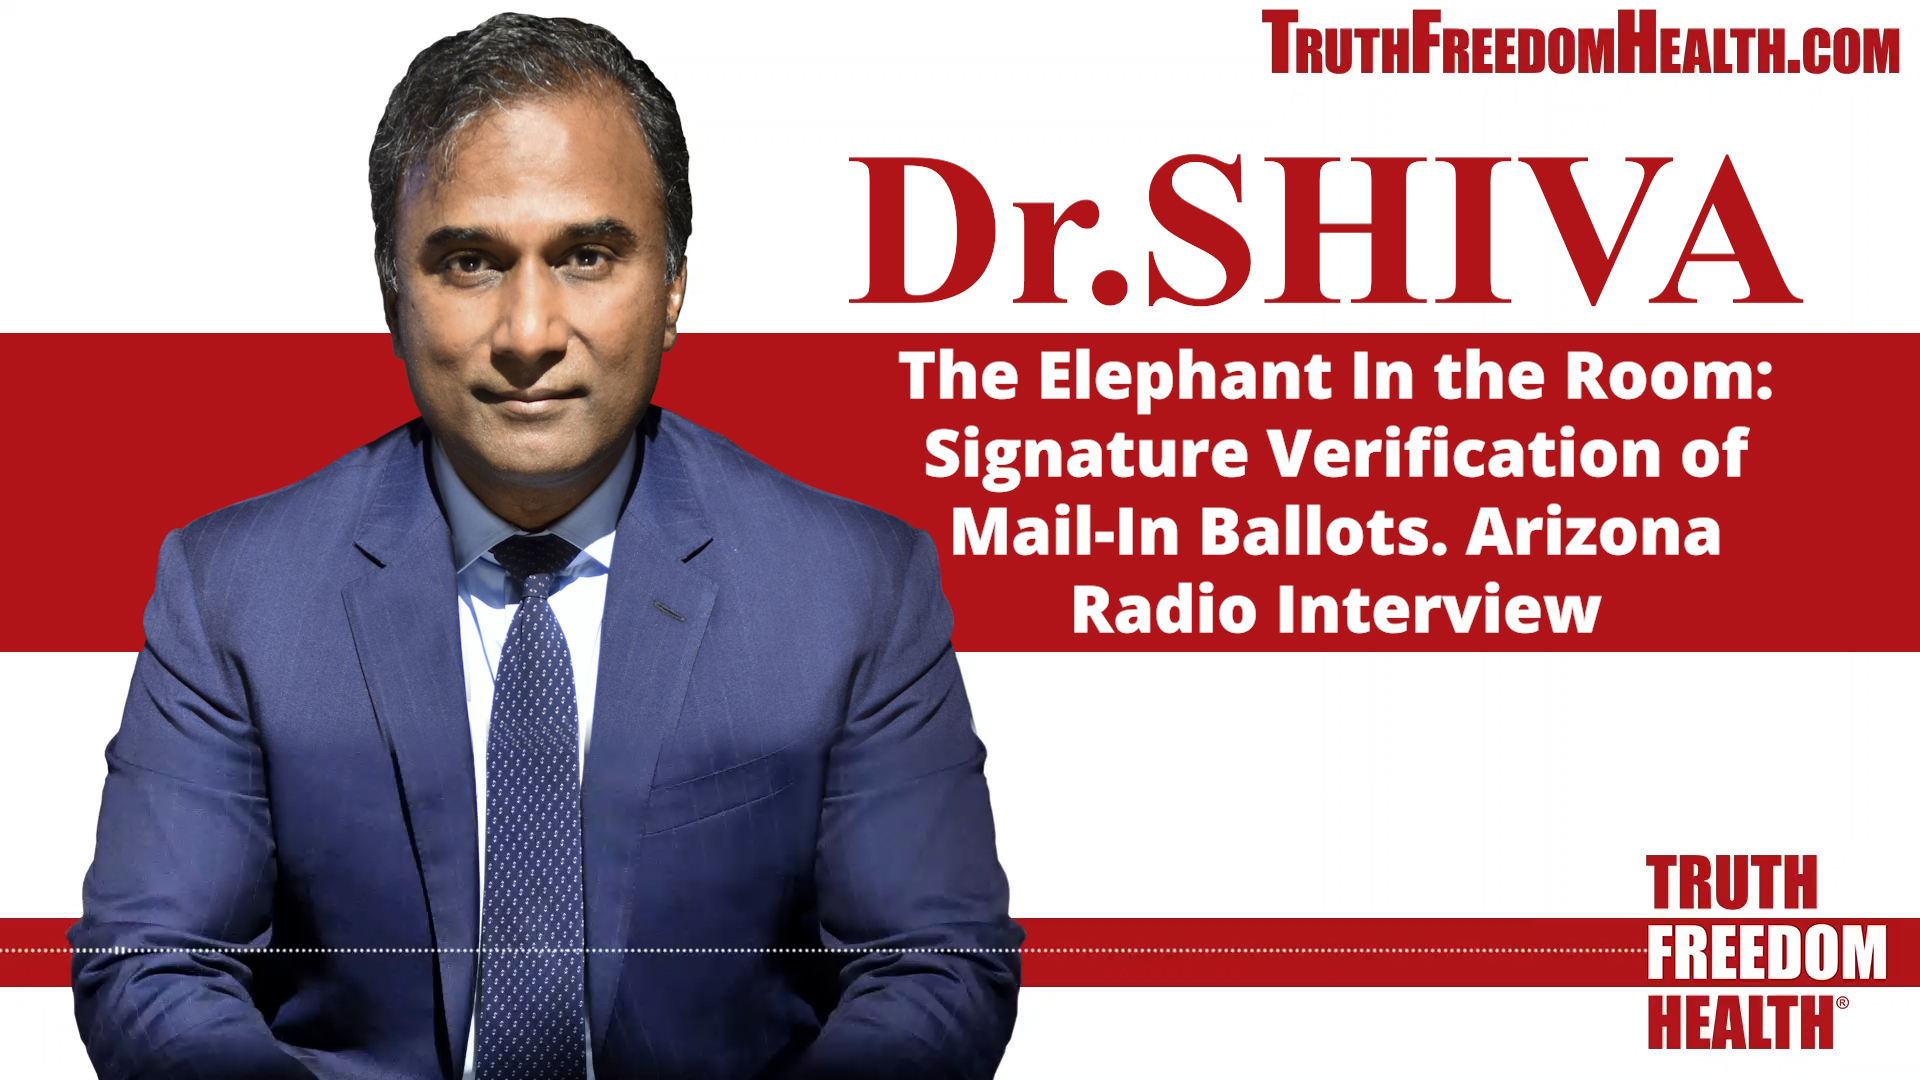 Dr. SHIVA BROADCAST: The Elephant in the Room - Signature Verification of Ballots. Radio Interview.